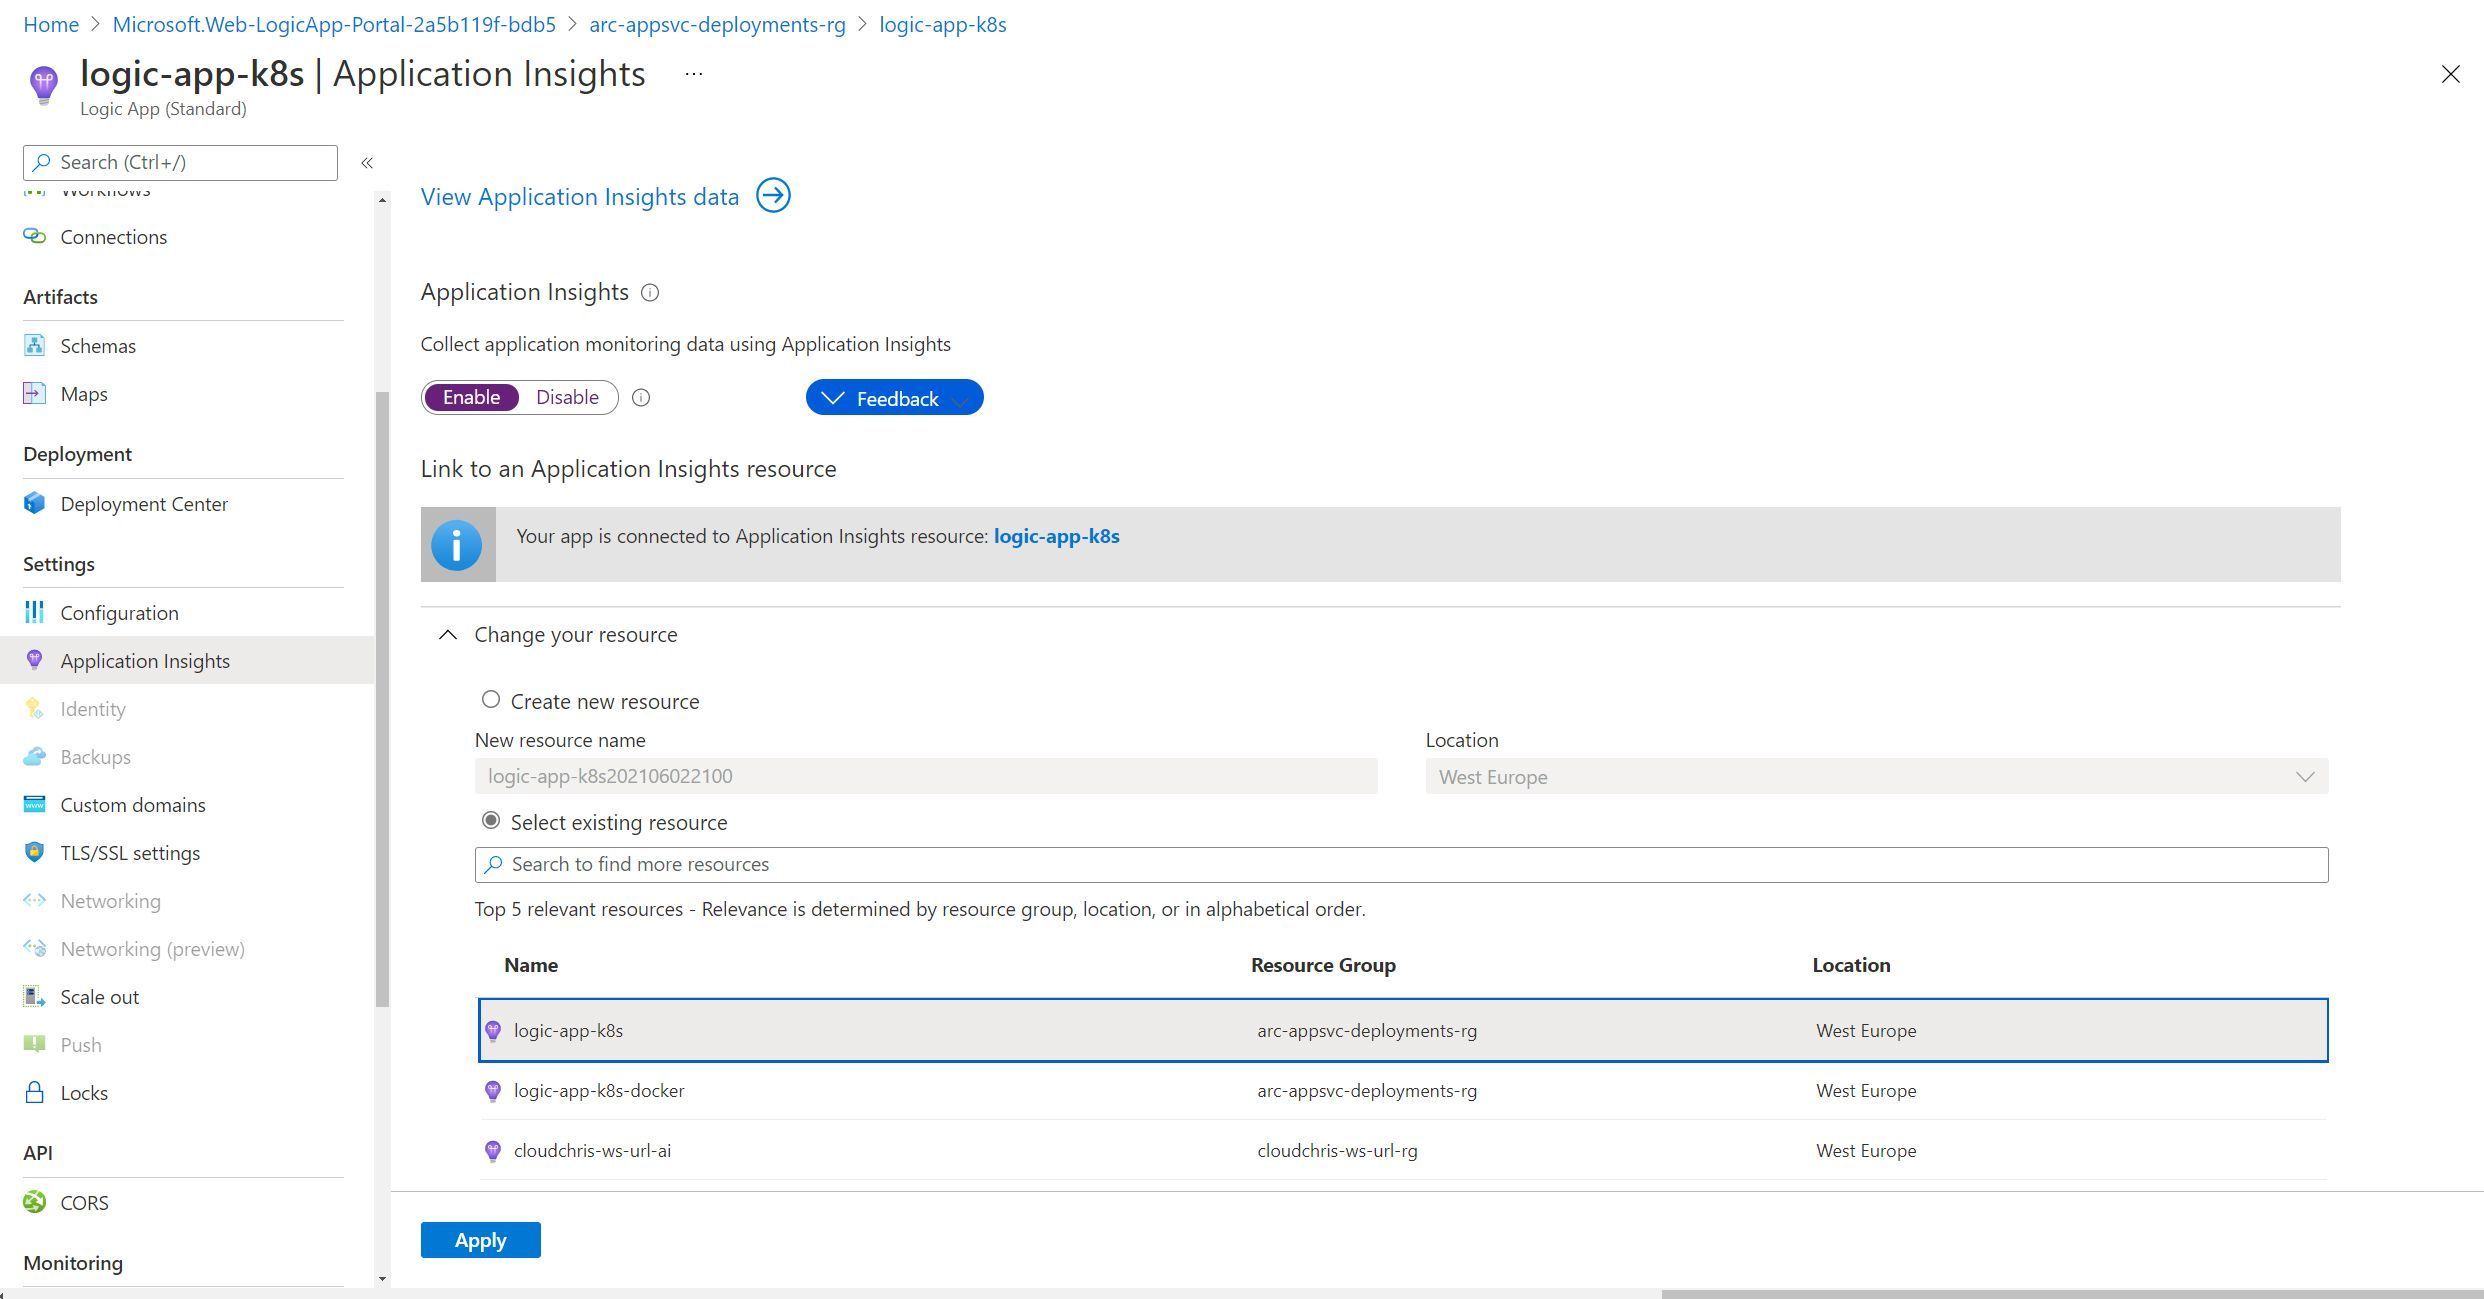 Screenshot showing the App Insights configuration experience for a Logic App in an Application Service Kubernetes Environment